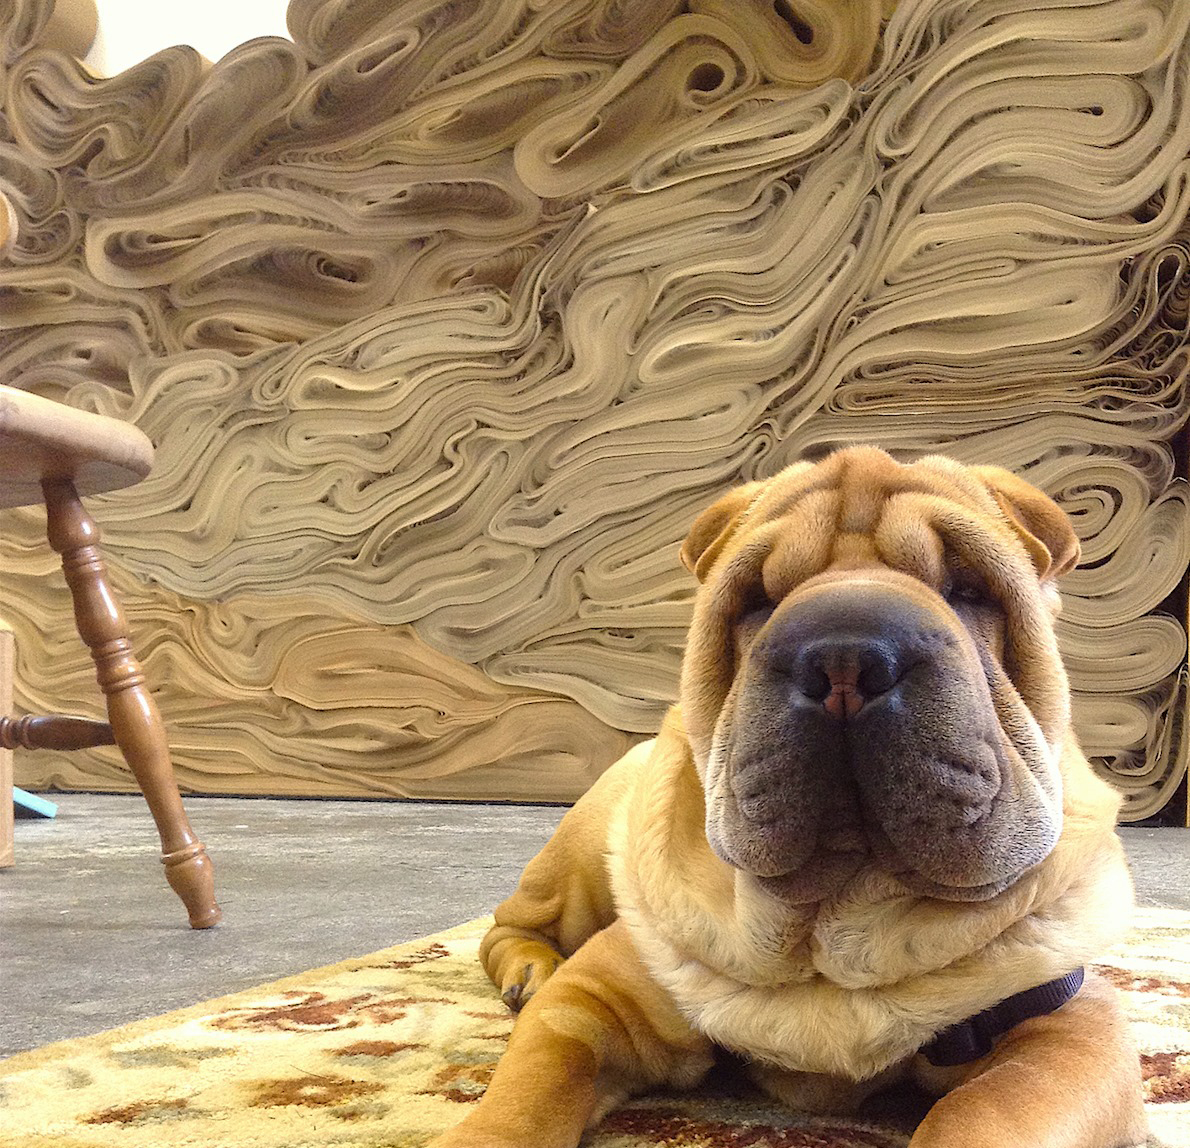 Photograph of a dog laying in front of an artwork made of rolls of paper